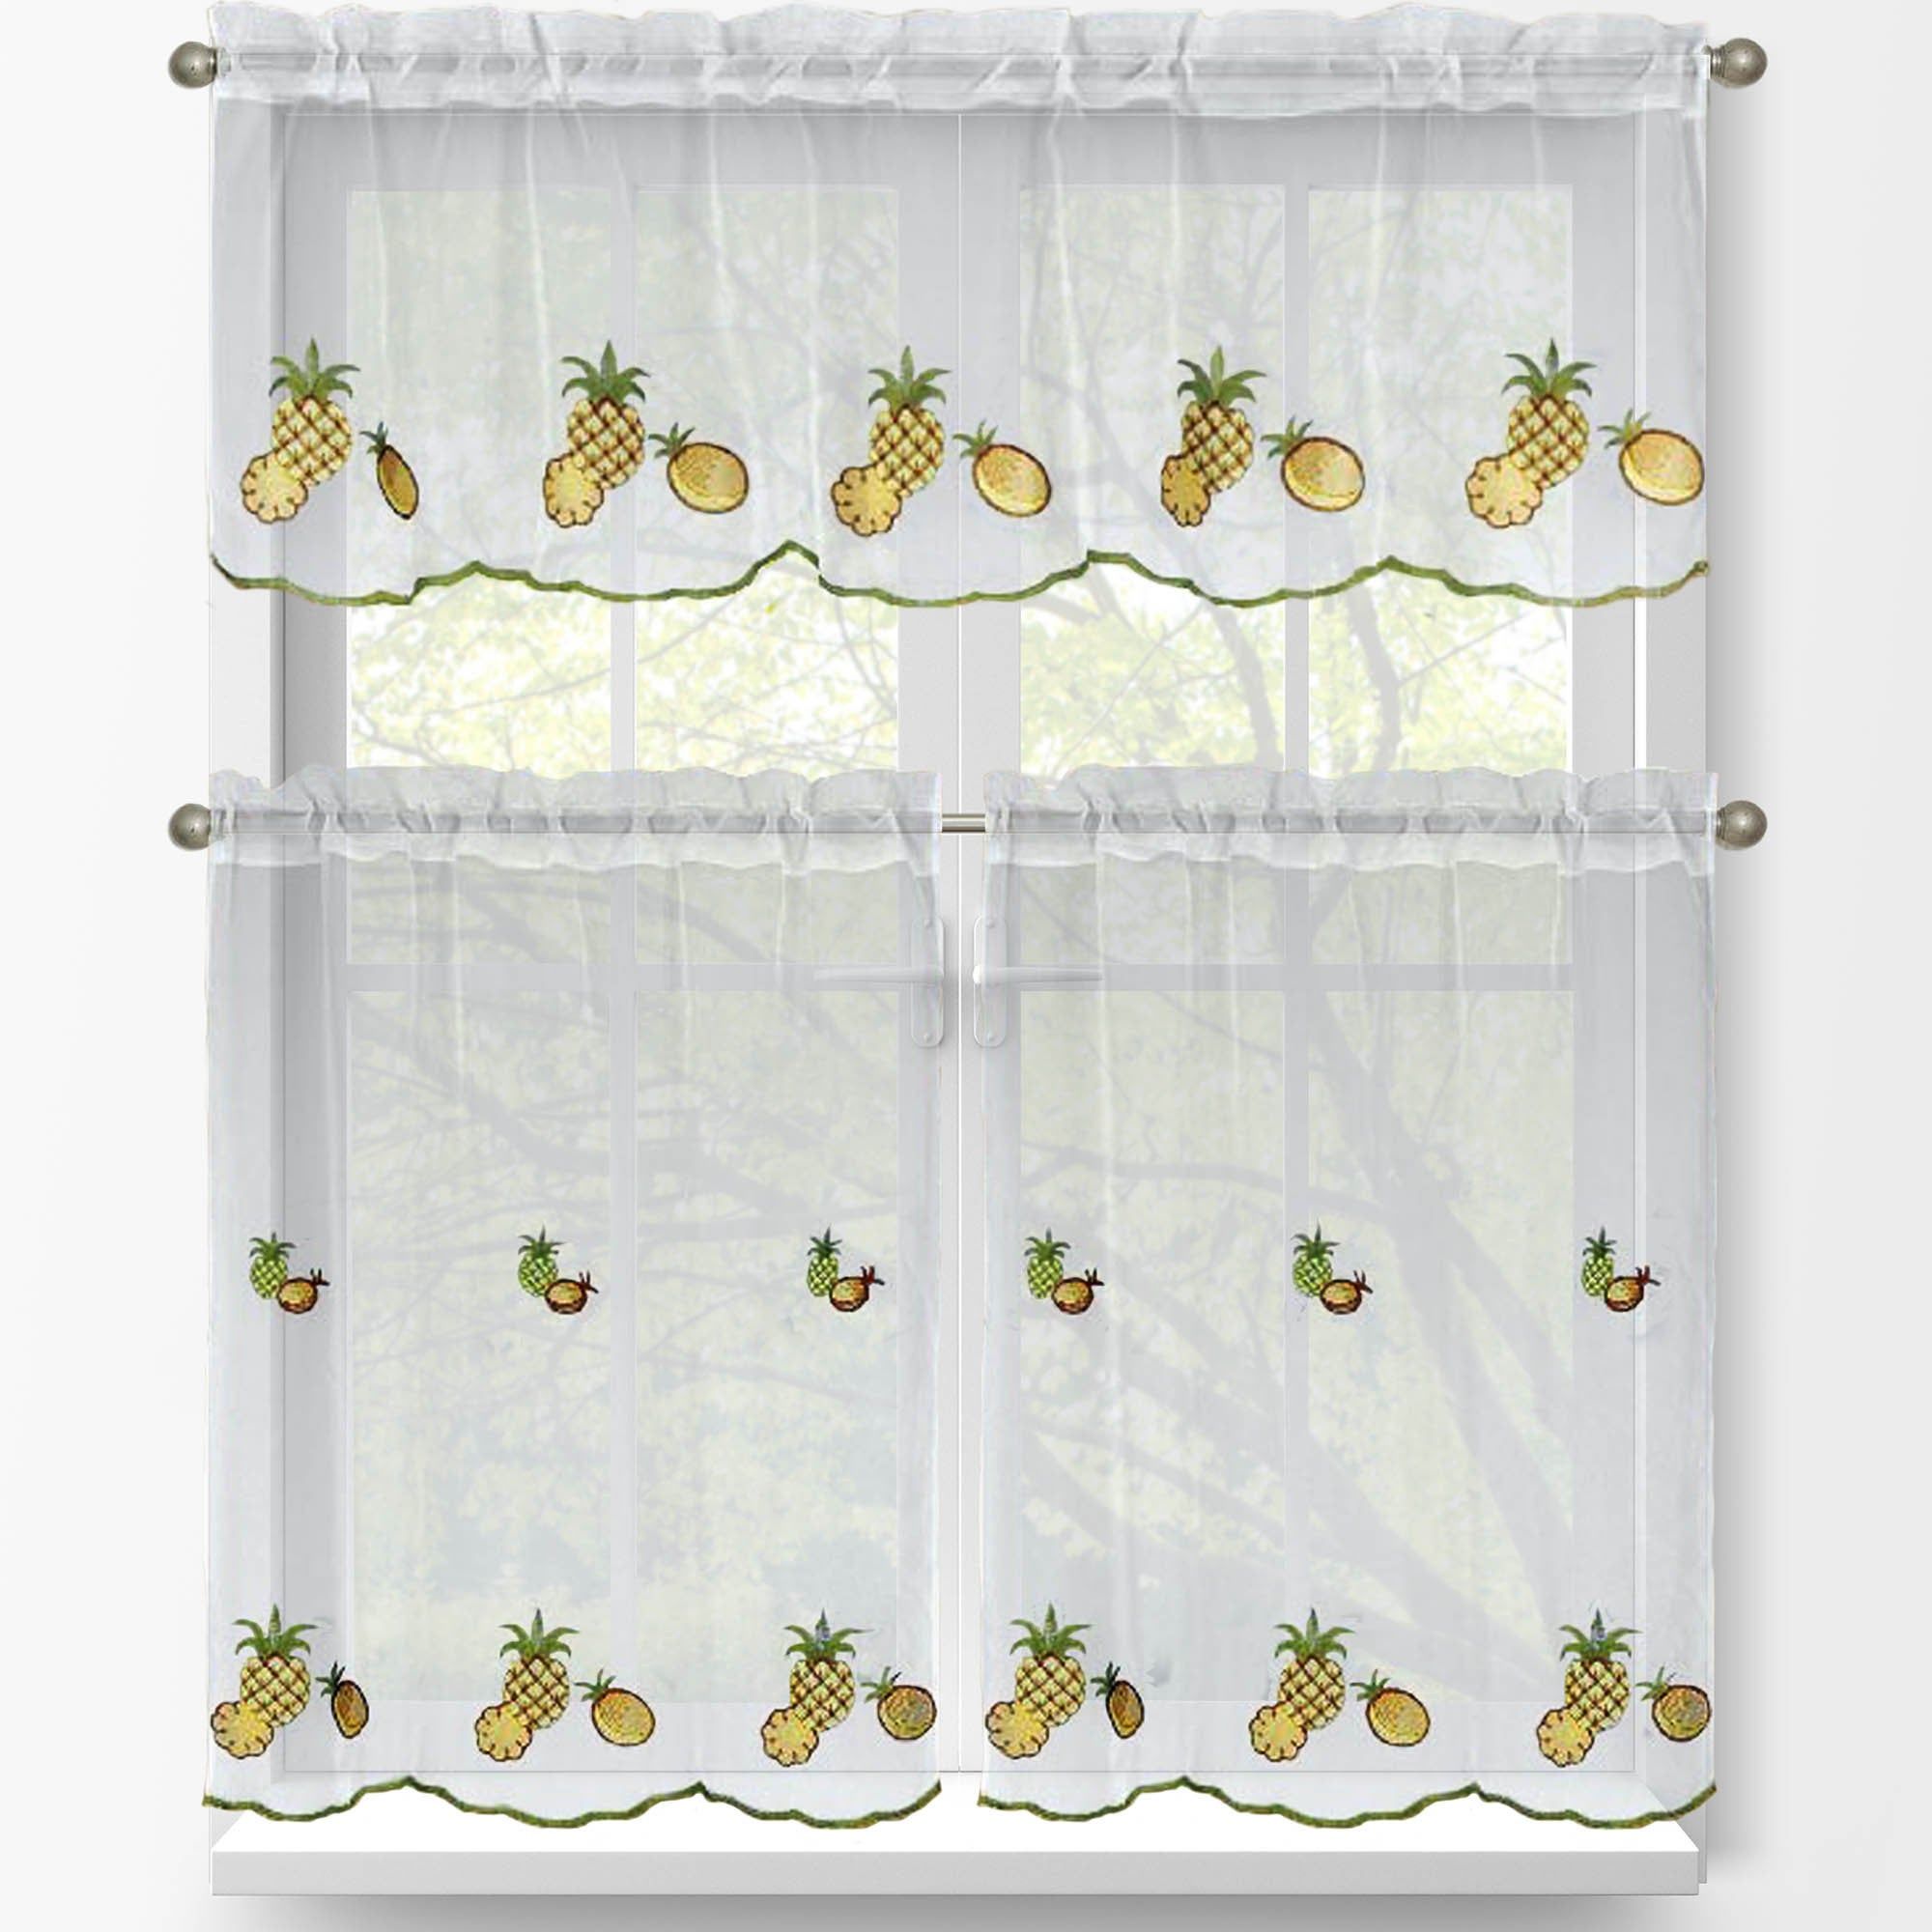 Window Elements Embroidered 3 Piece Kitchen Tier And Valance Set With Regard To Coffee Drinks Embroidered Window Valances And Tiers (View 10 of 20)